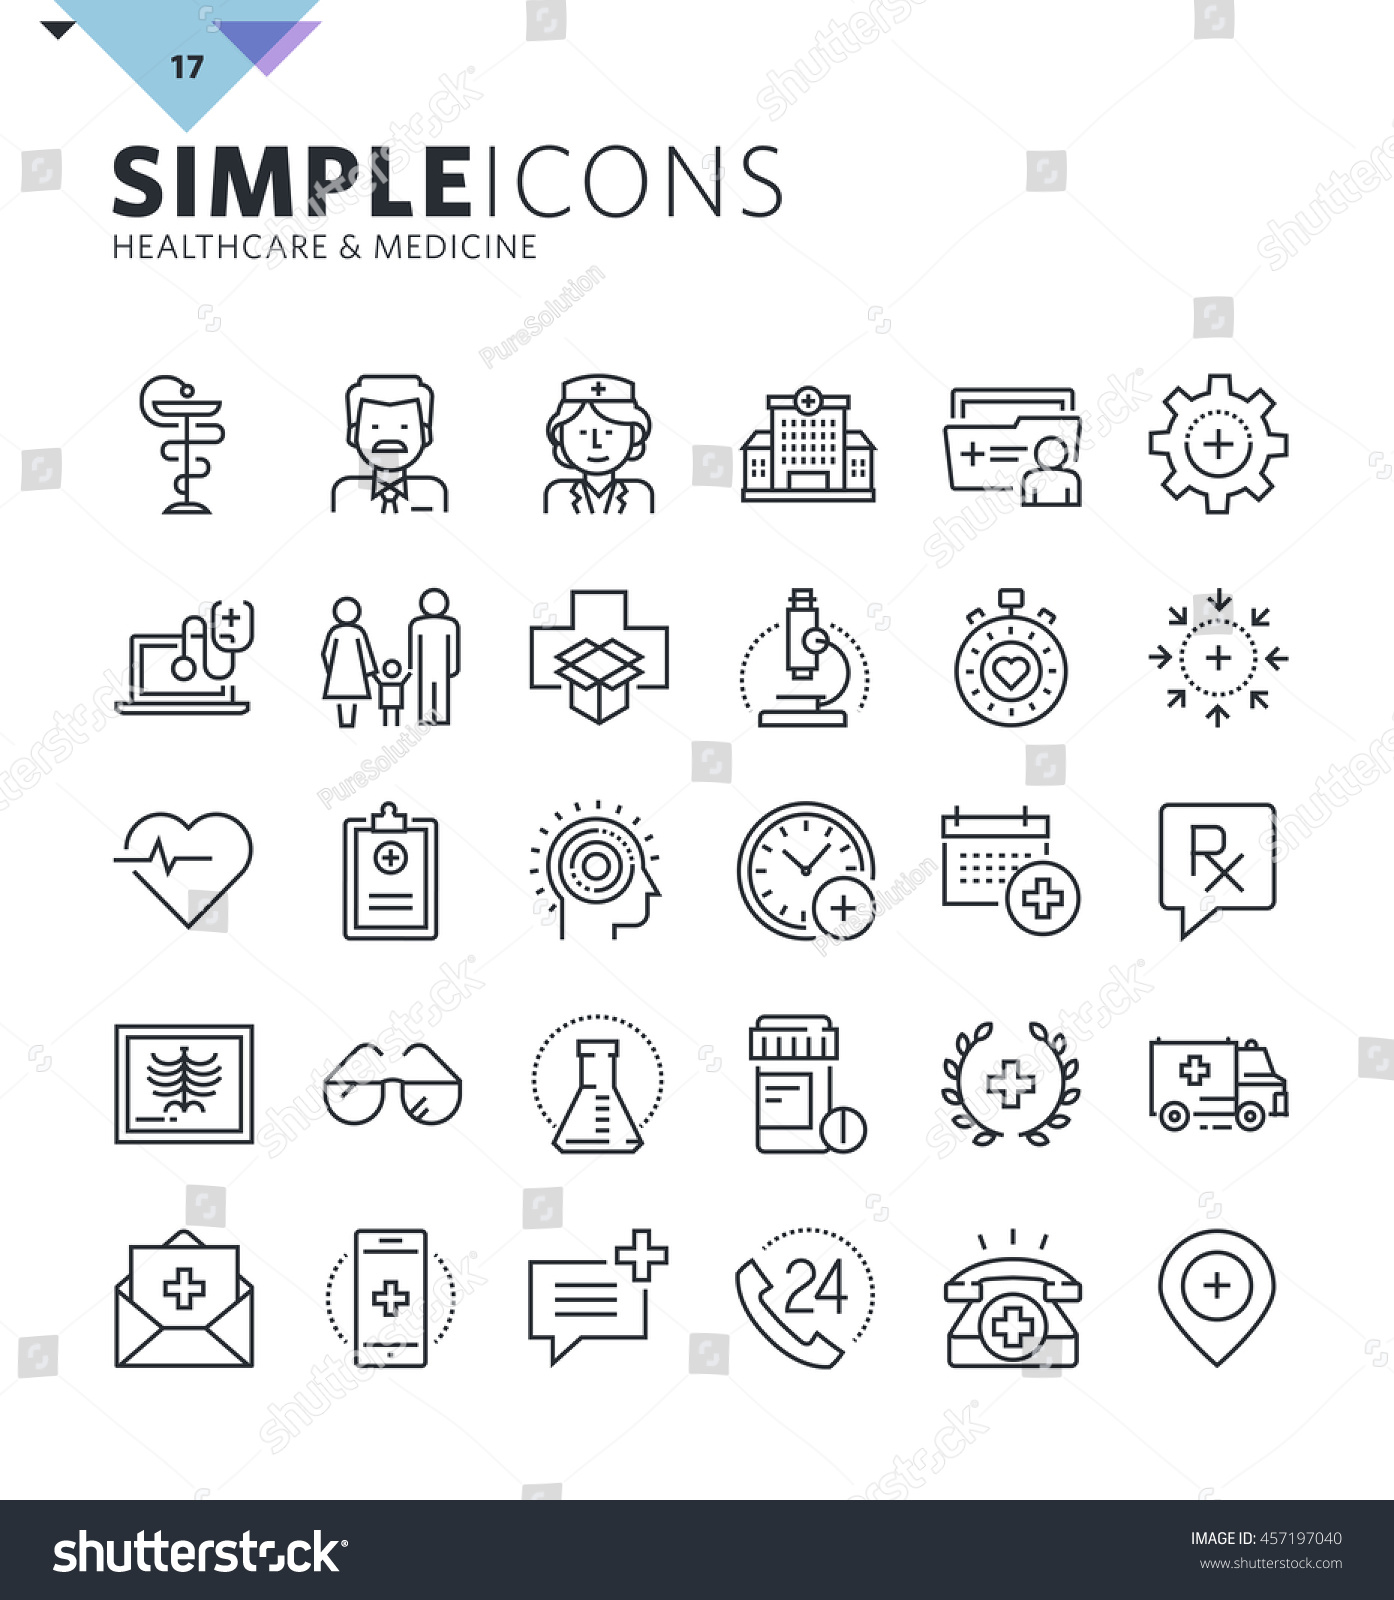 SVG of Modern thin line medical icons. Premium quality outline symbol collection for web design, mobile app, graphic design. Mono linear pictograms, infographics and web elements pack. svg